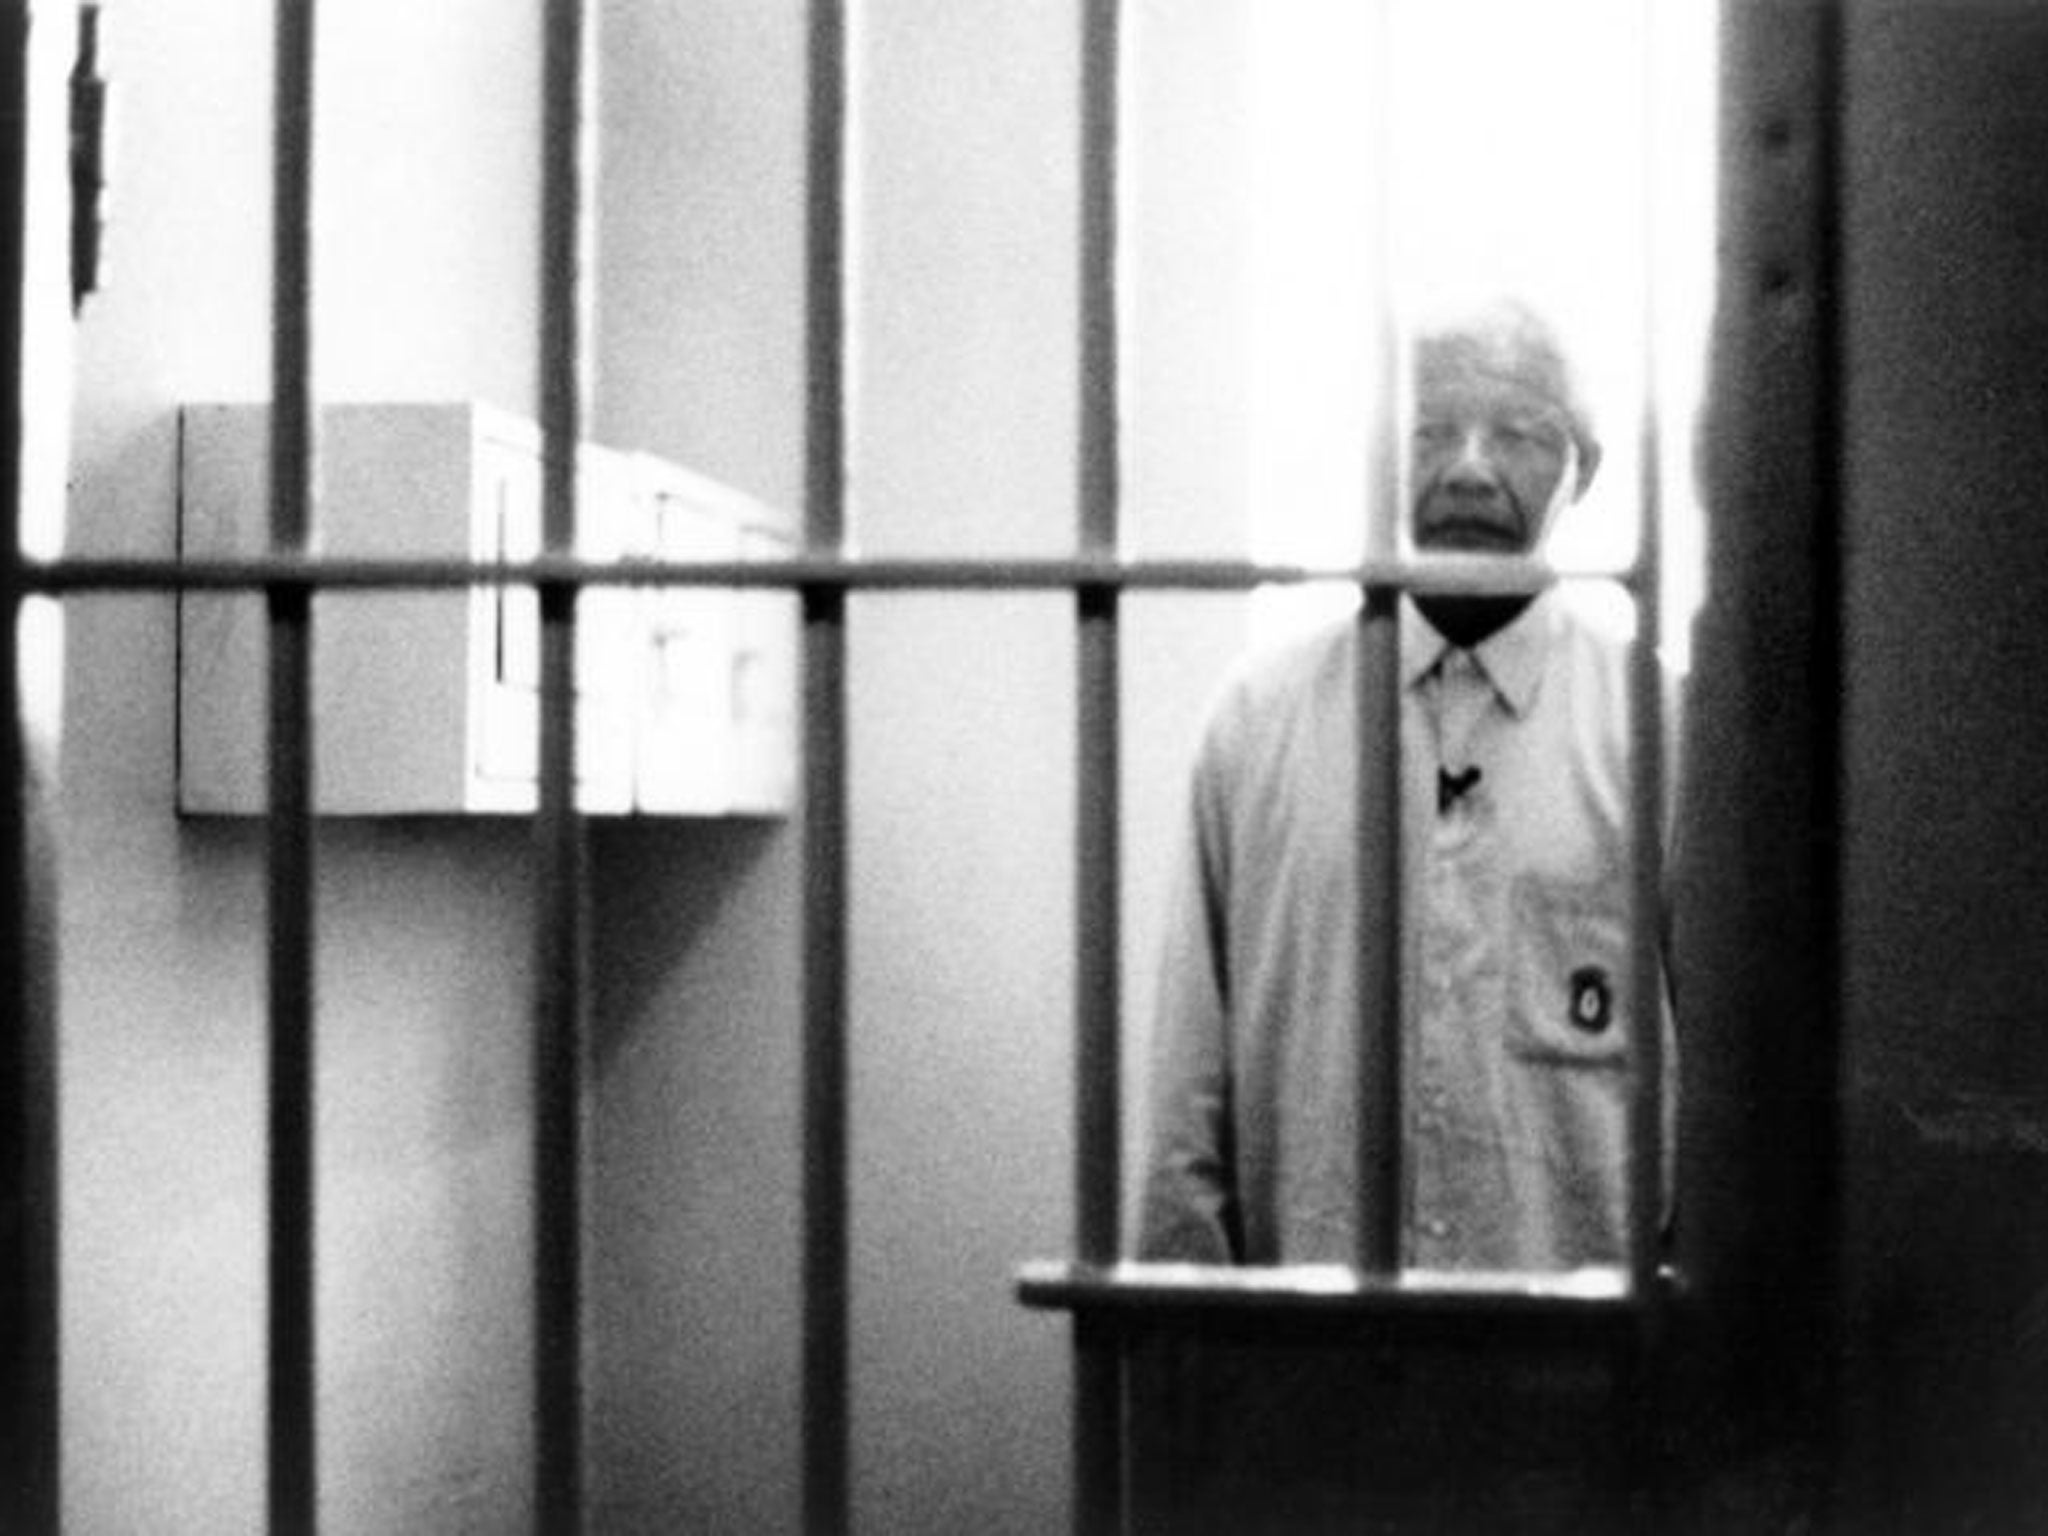 Looking back: In his former cell on Robben Island in 1996